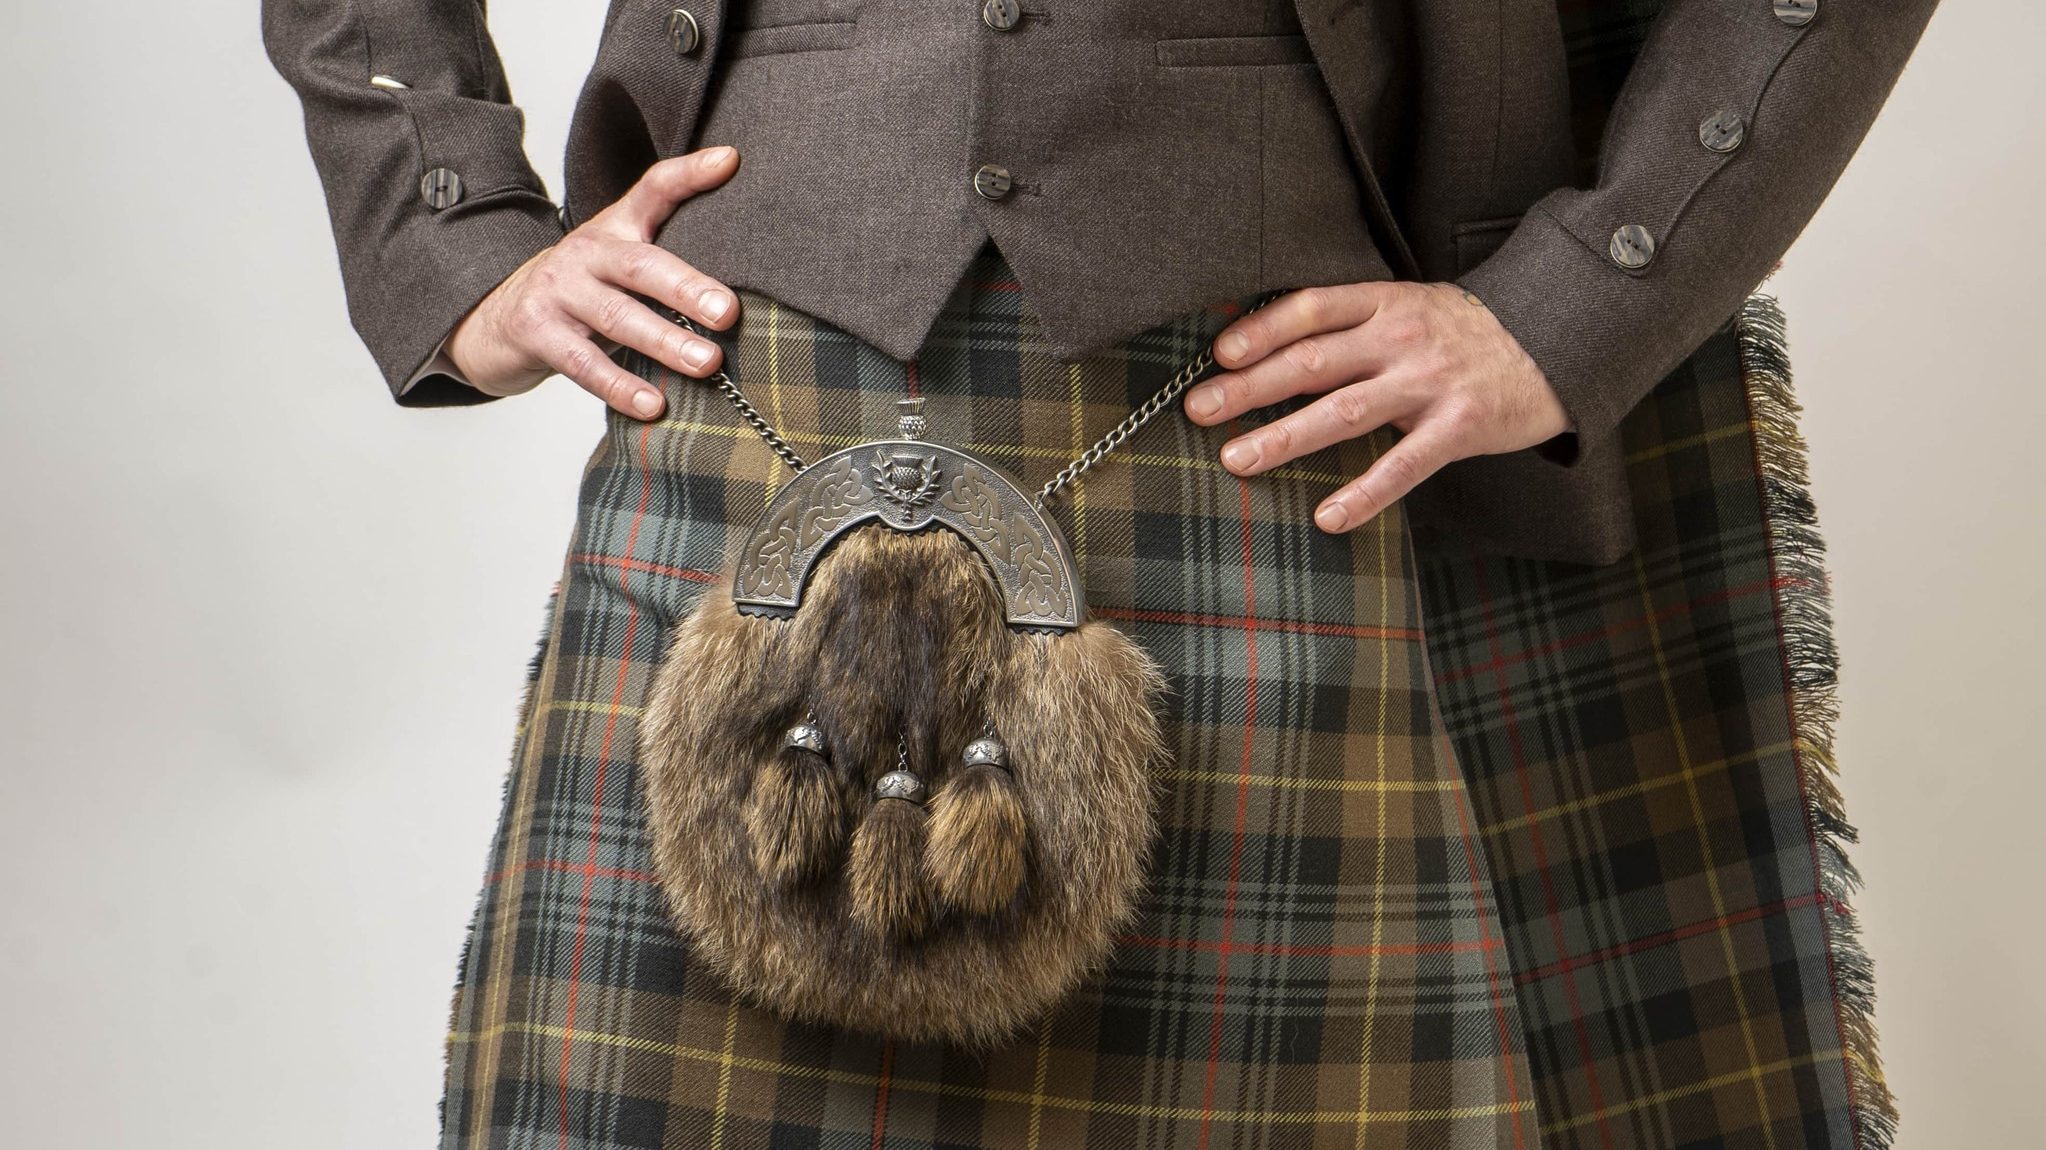 How much does a kilt cost?